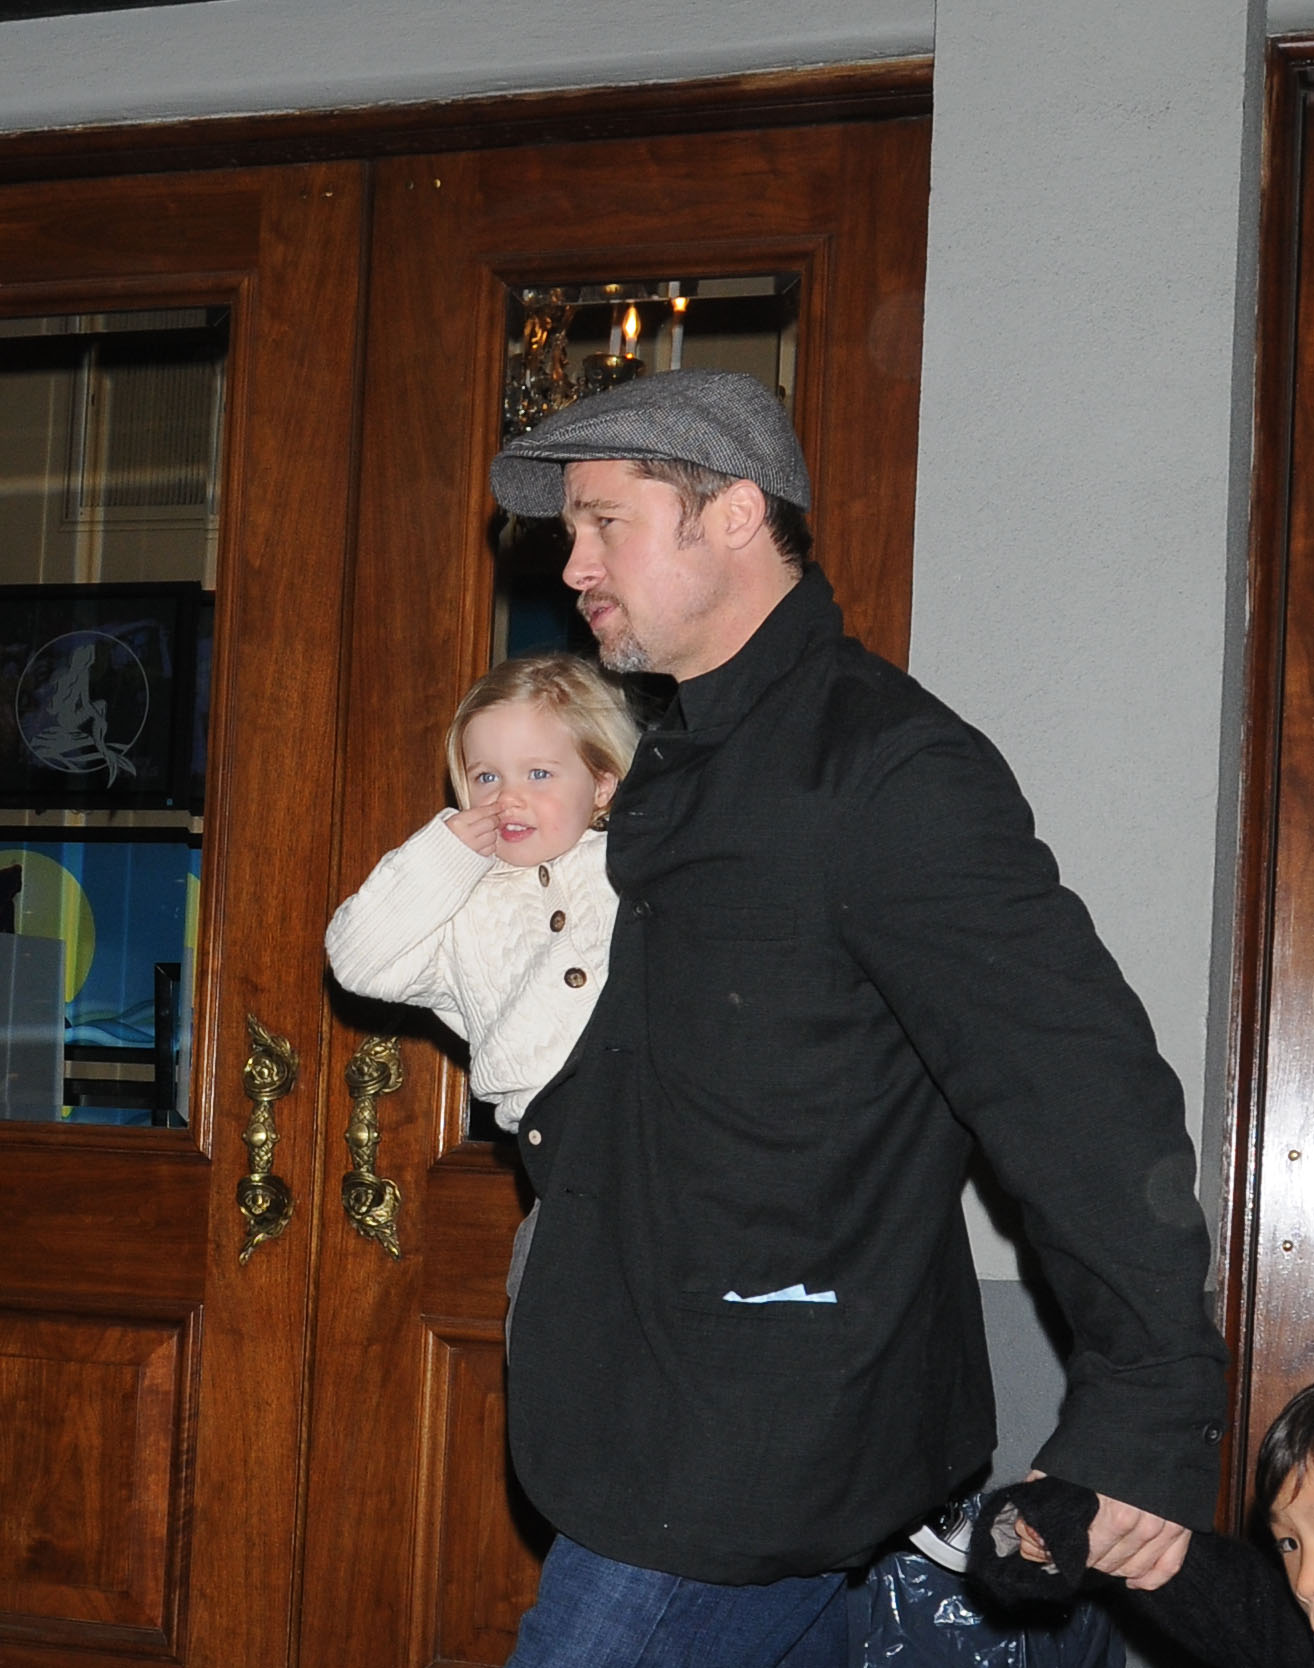 Shiloh Jolie-Pitt, Brad Pitt and Maddox Jolie-Pitt spotted out in New York City on February 25, 2009 | Source: Getty Images